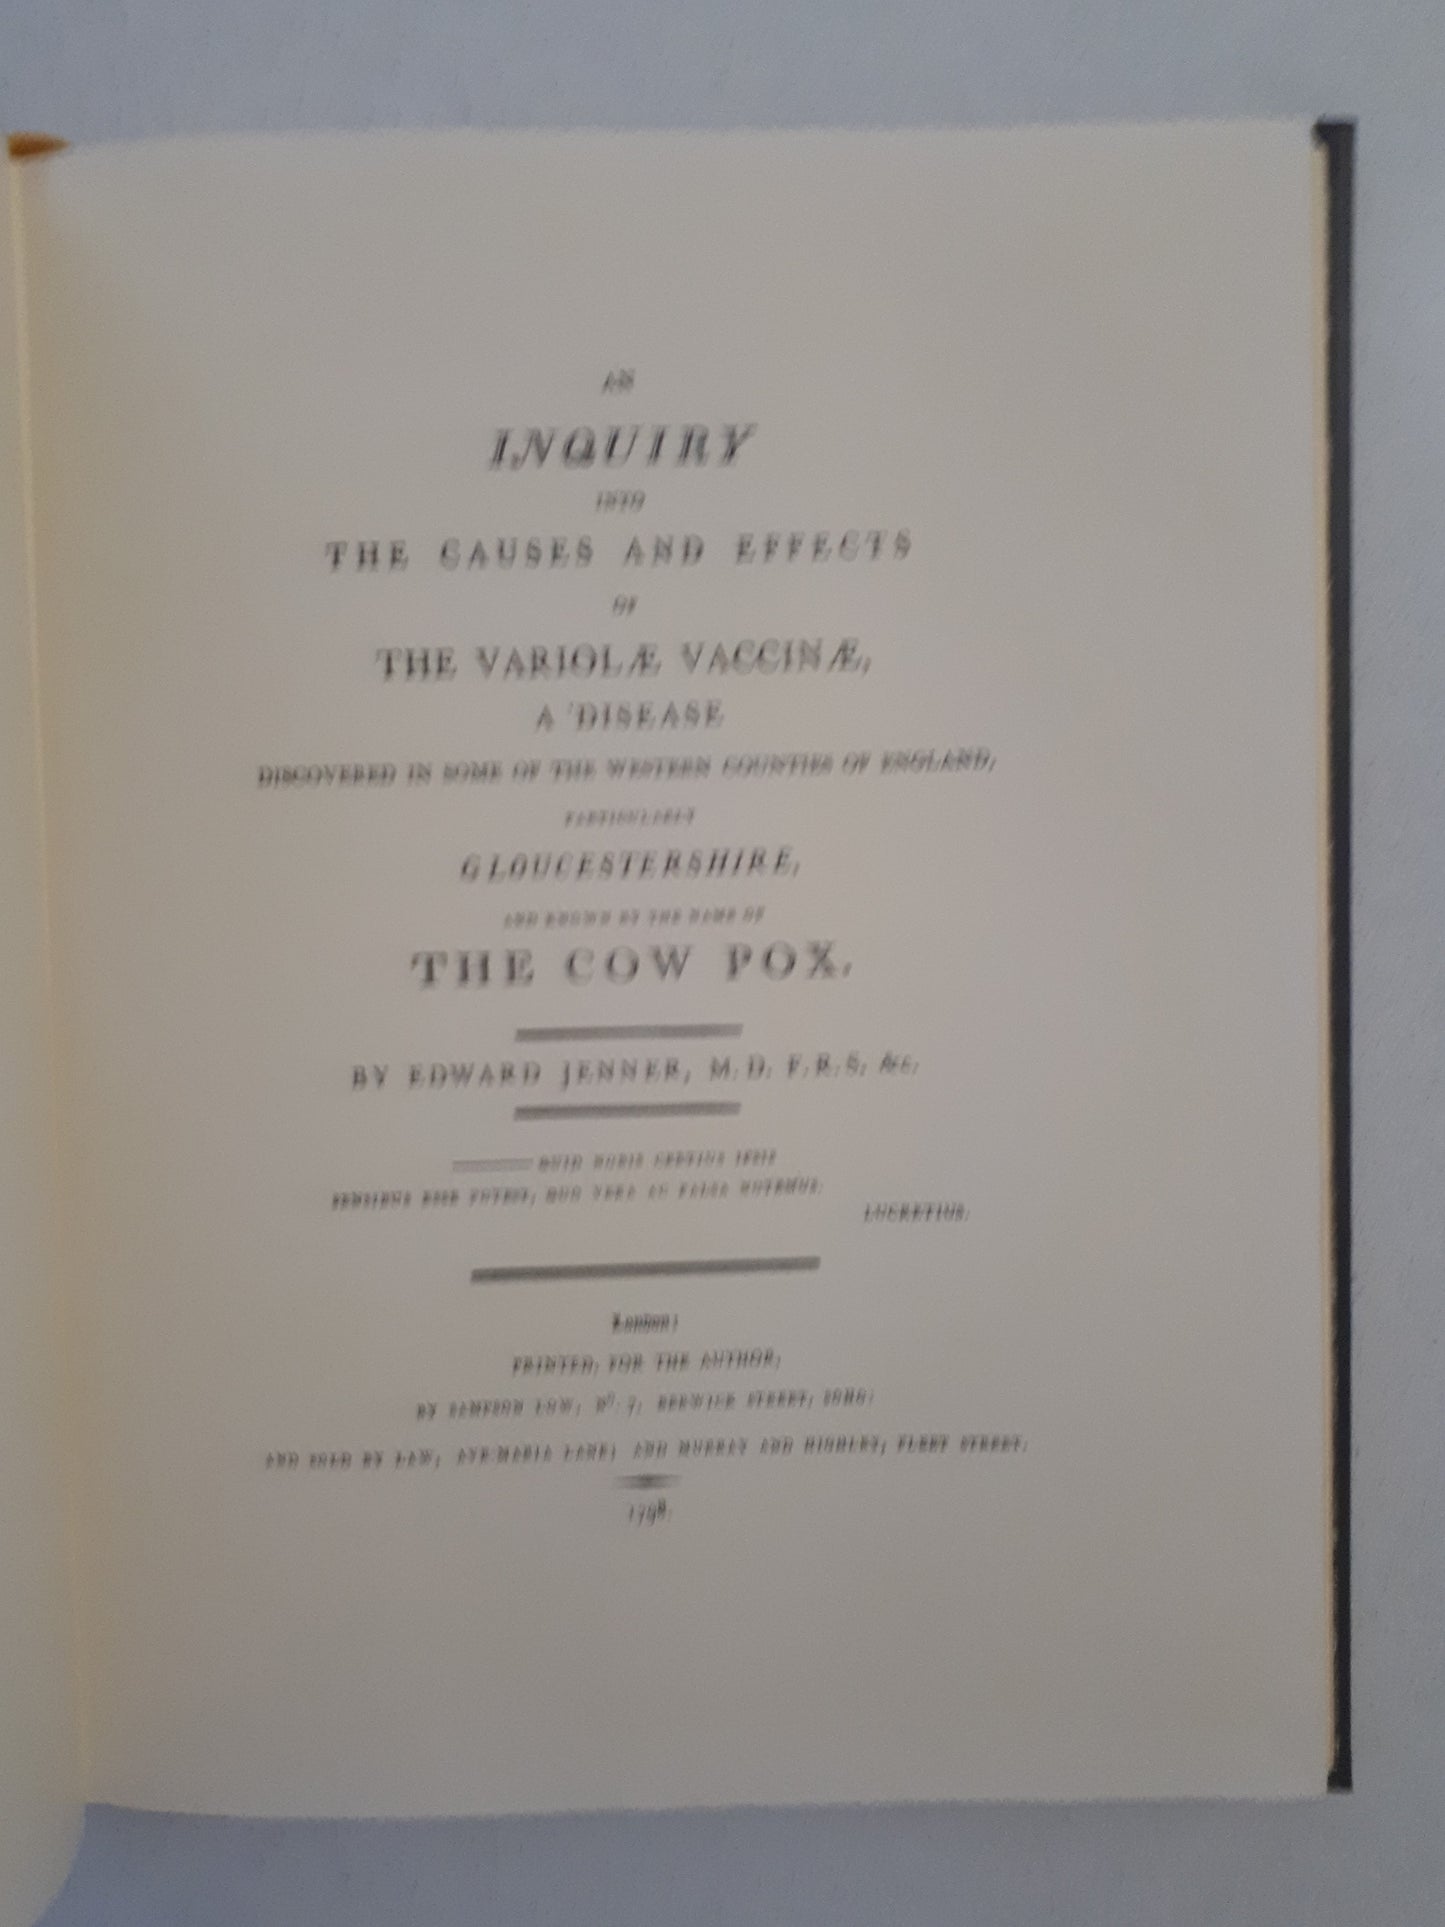 An Inquiry into The Causes and Effects of The Variolae Vaccinae by Edward Jenner